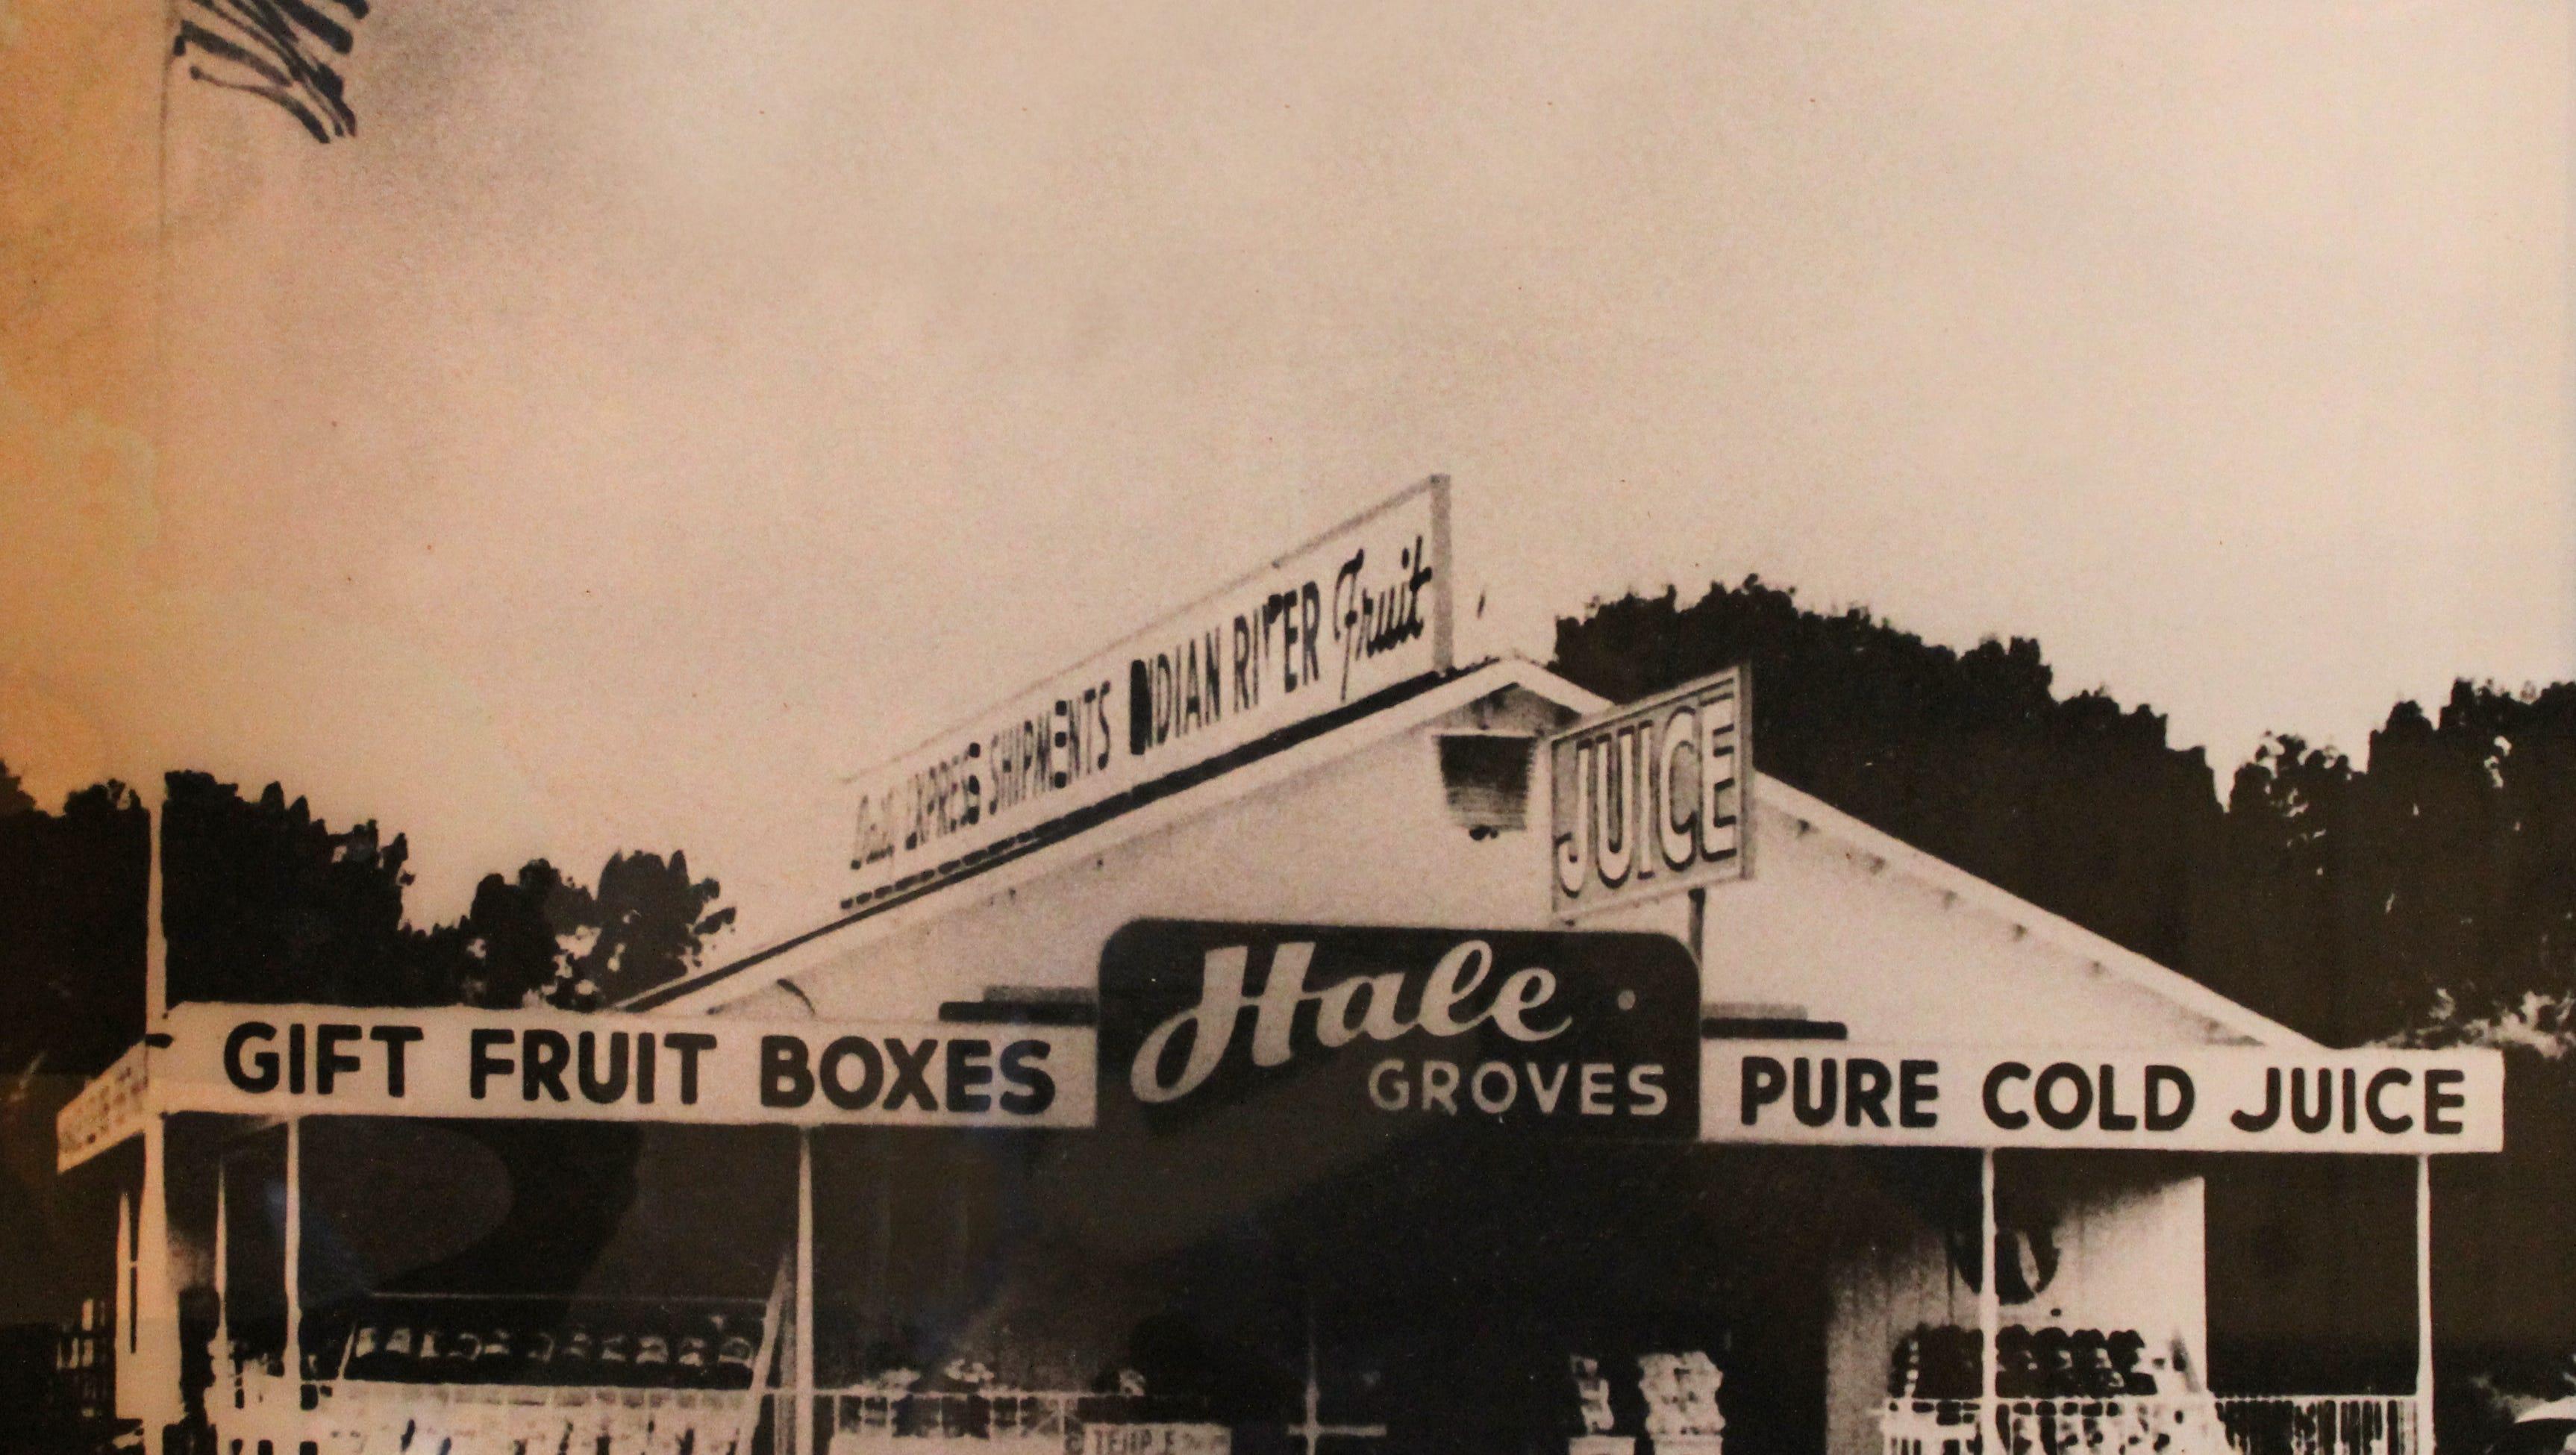 Second roadside stand circa which was open from 1947 to 1960.